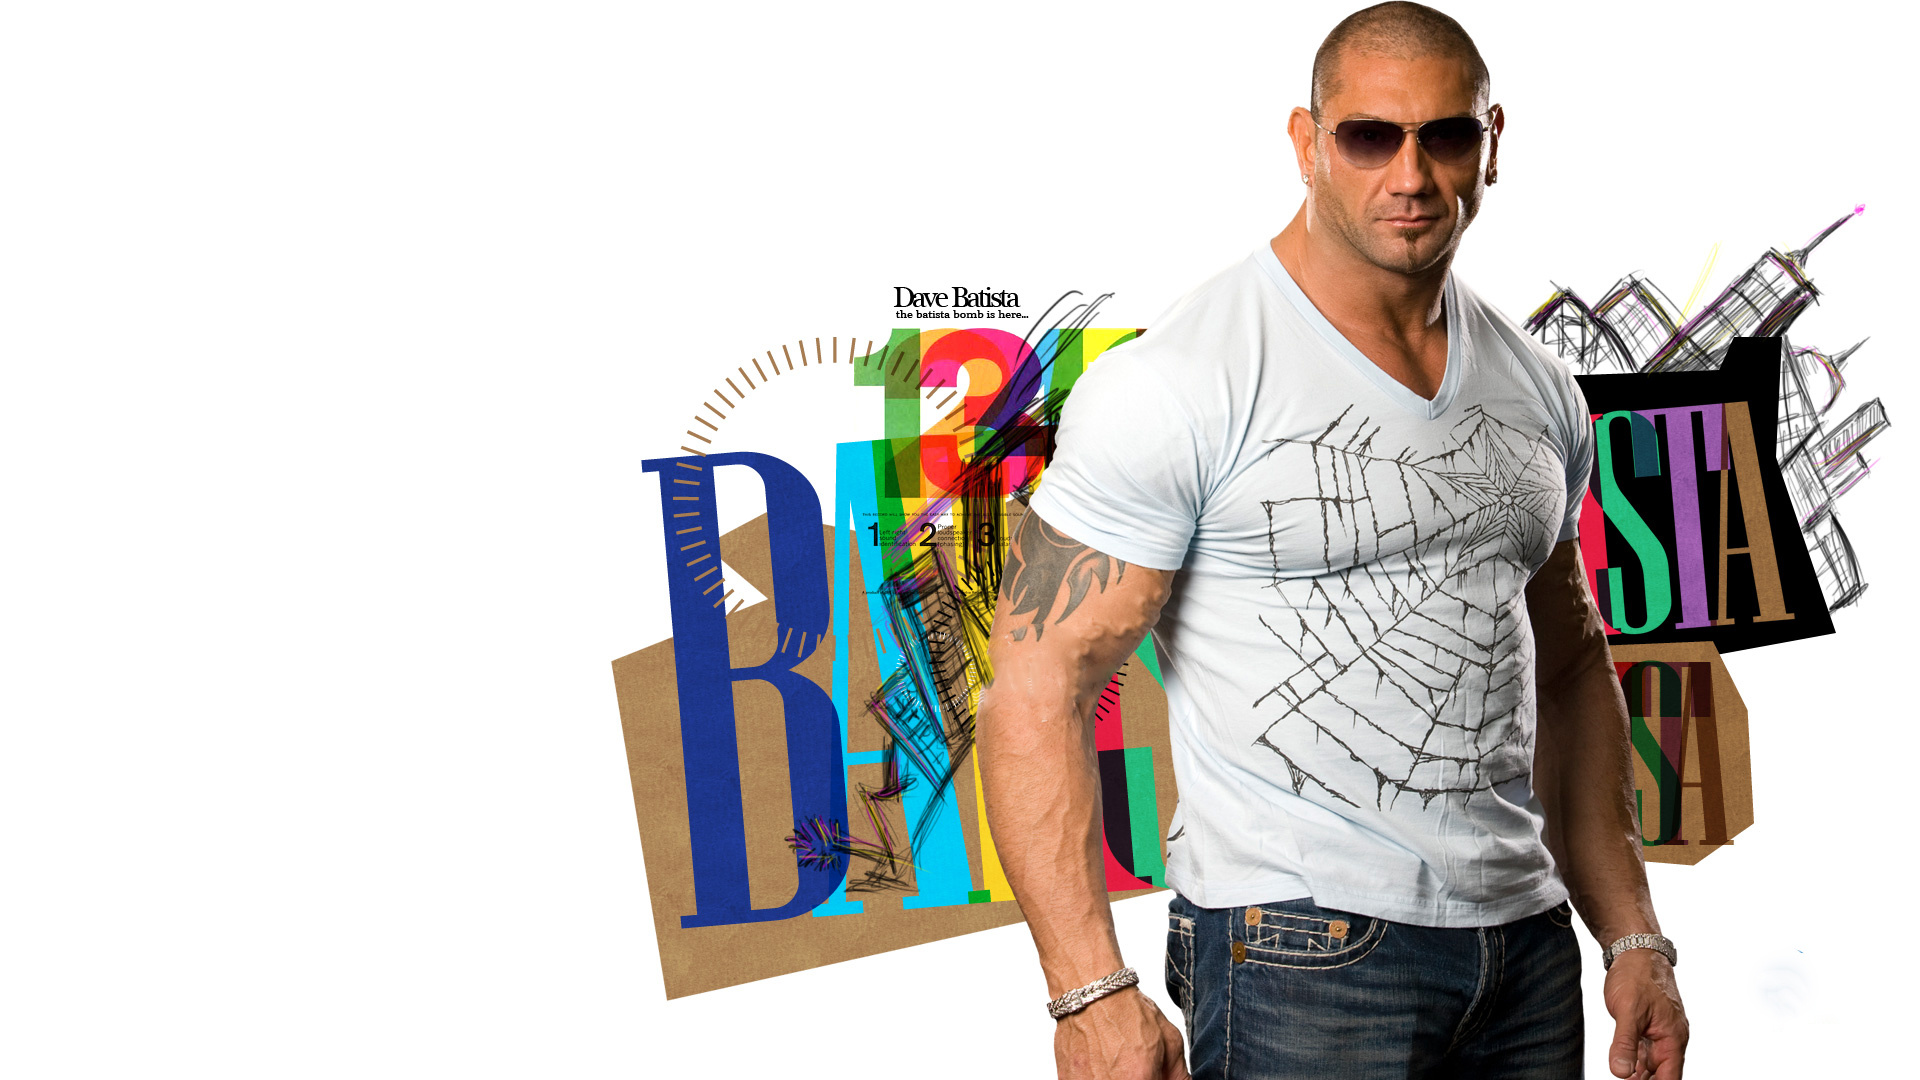 Dave Bautista, High resolution wallpapers, Quality download, 1920x1080 Full HD Desktop